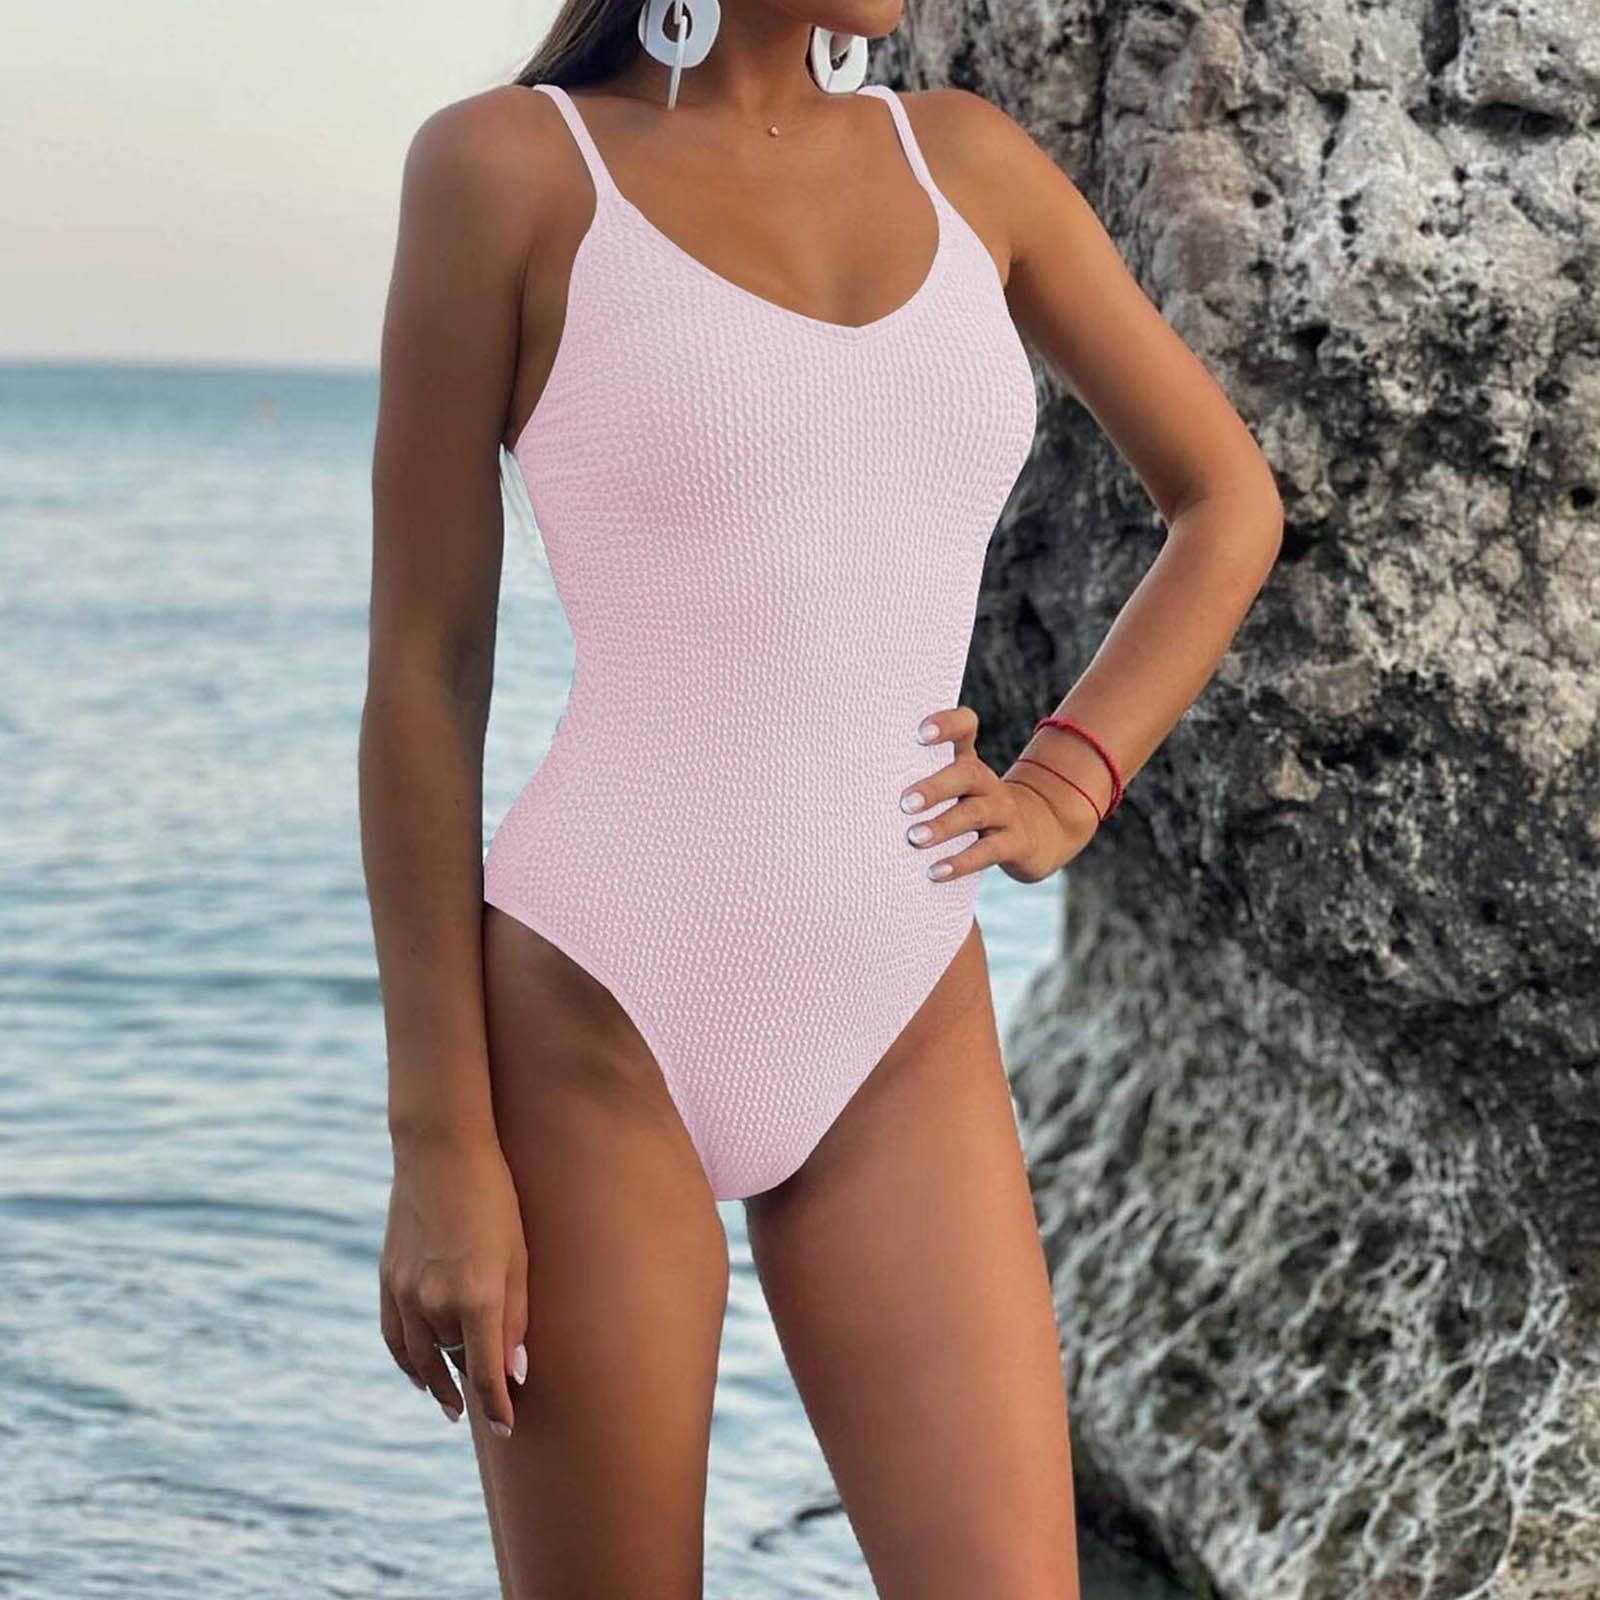 Njoeus One Piece Bathing Suit For Women High Waisted Swimsuits For